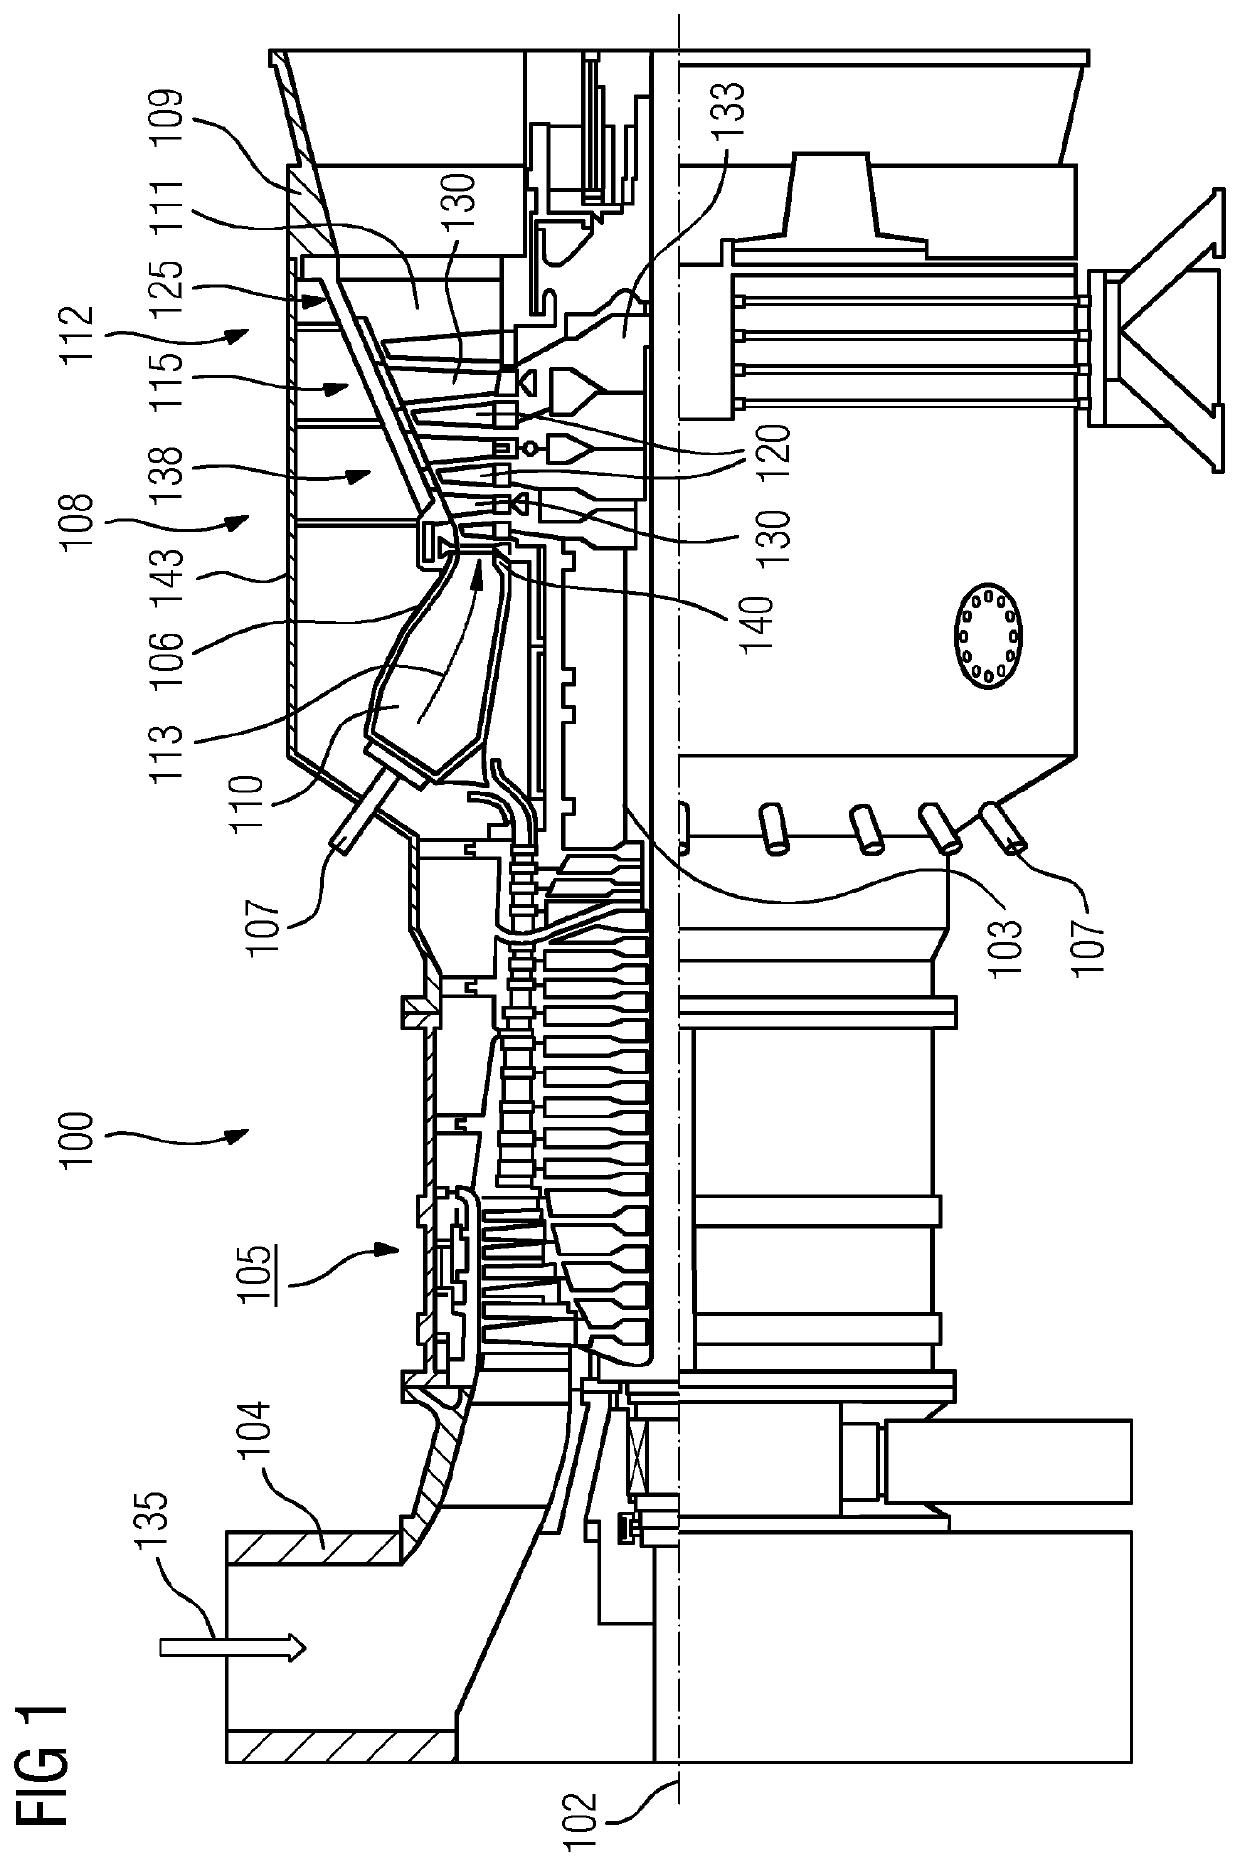 Method for producing a rotor blade